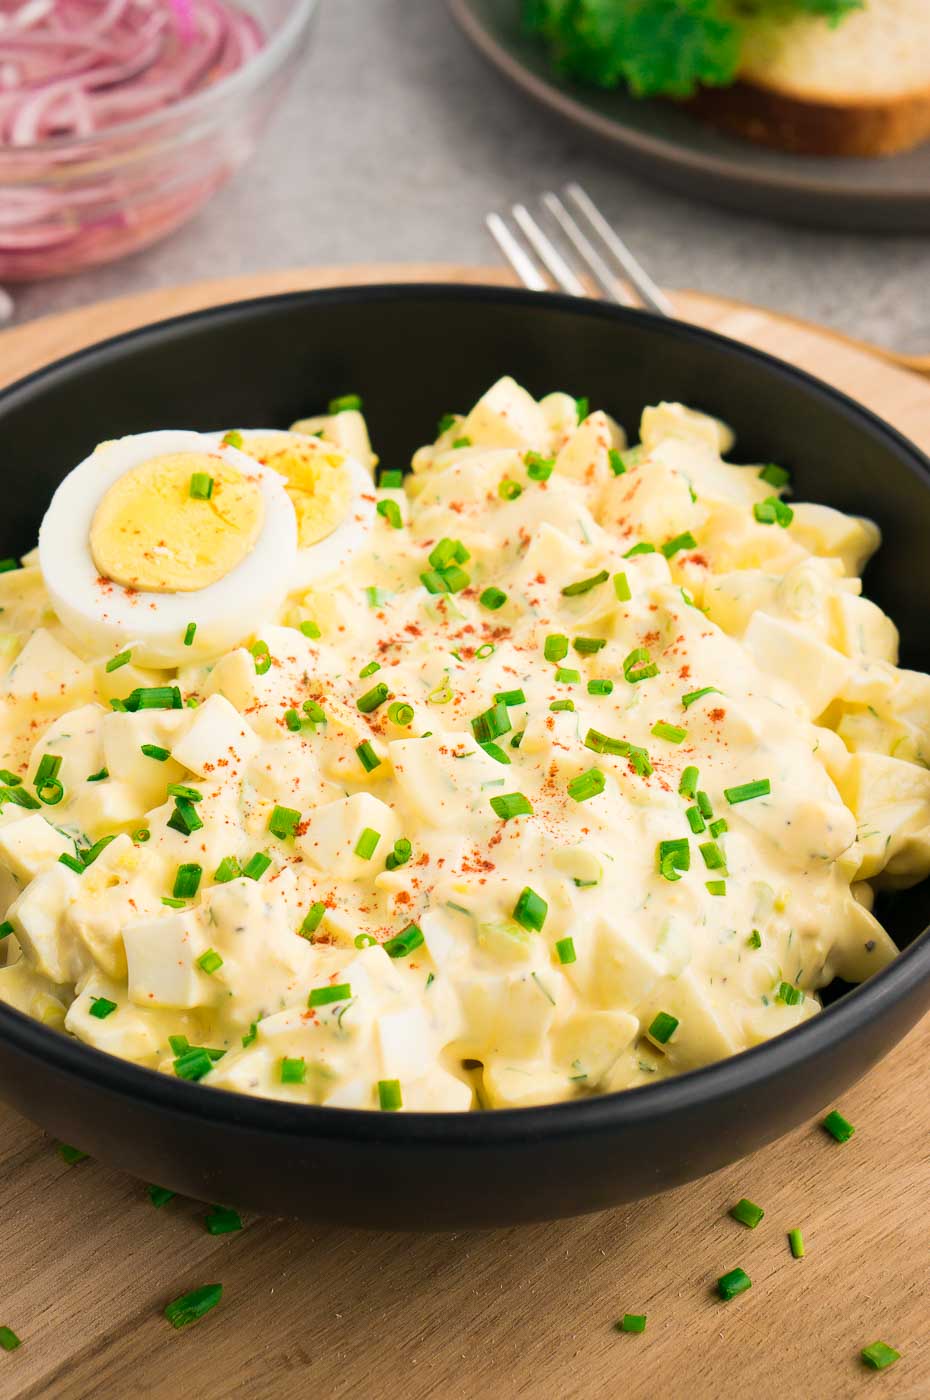 egg salad made with hard boiled eggs in a bowl